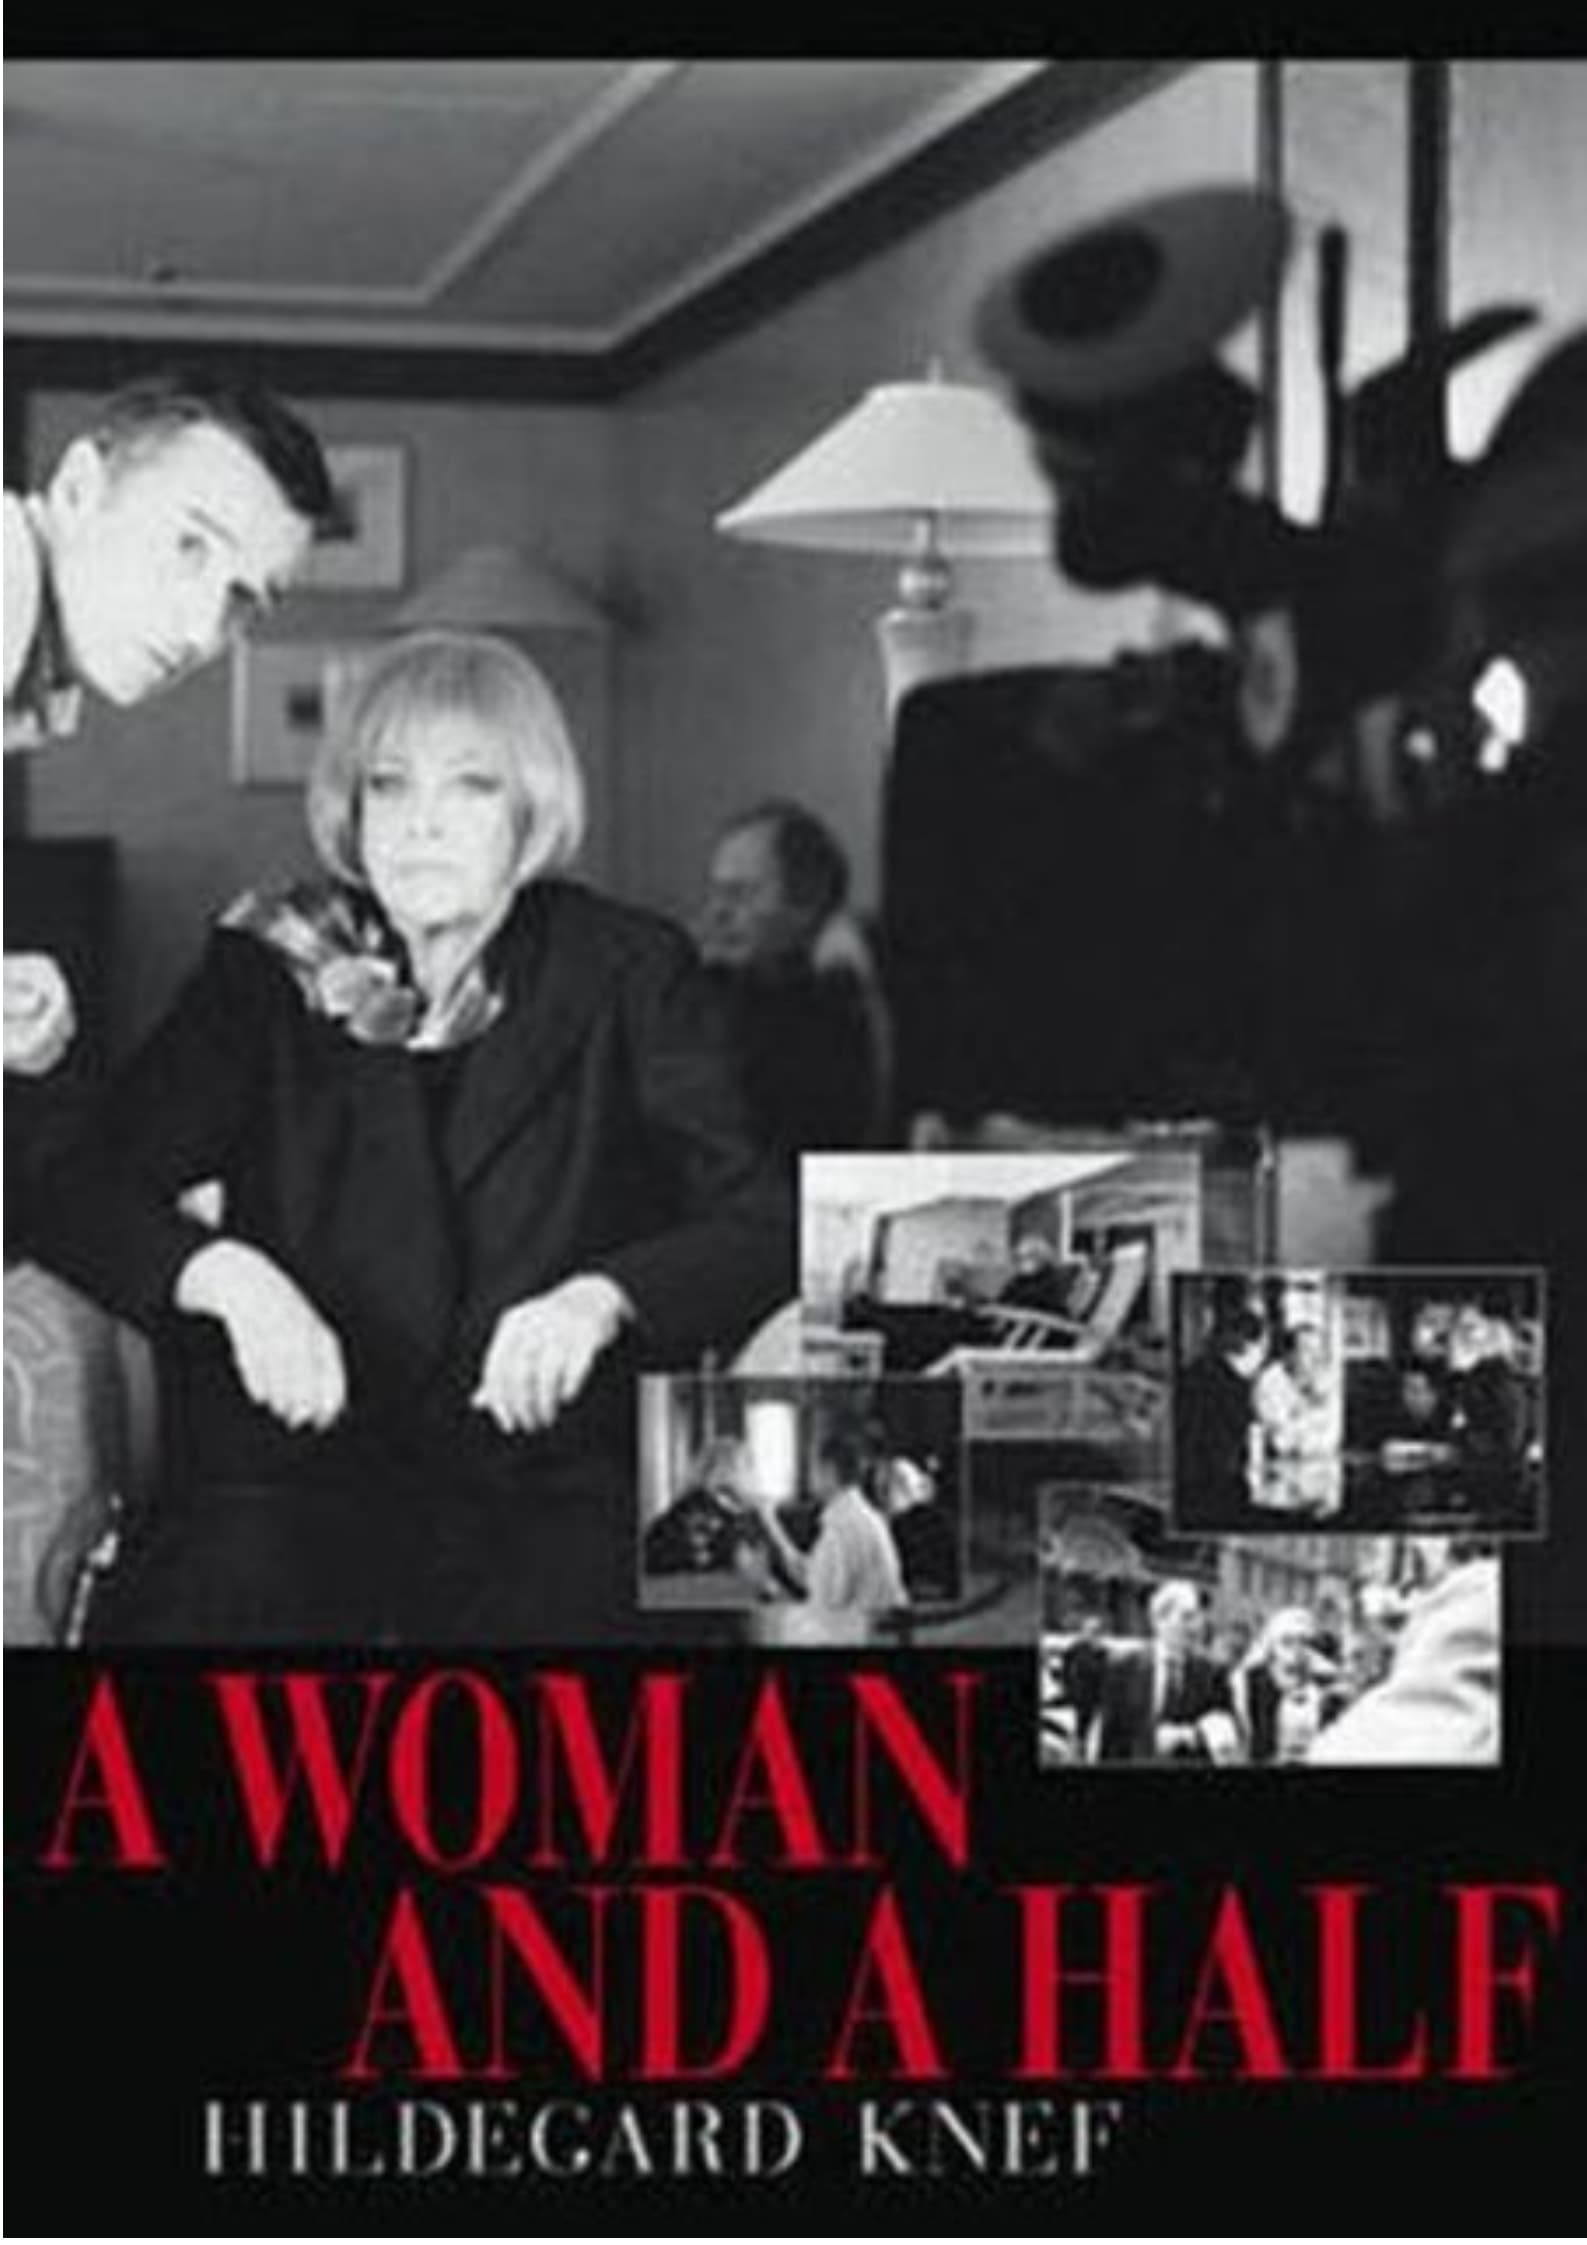 A Woman and a Half: Hildegard Knef